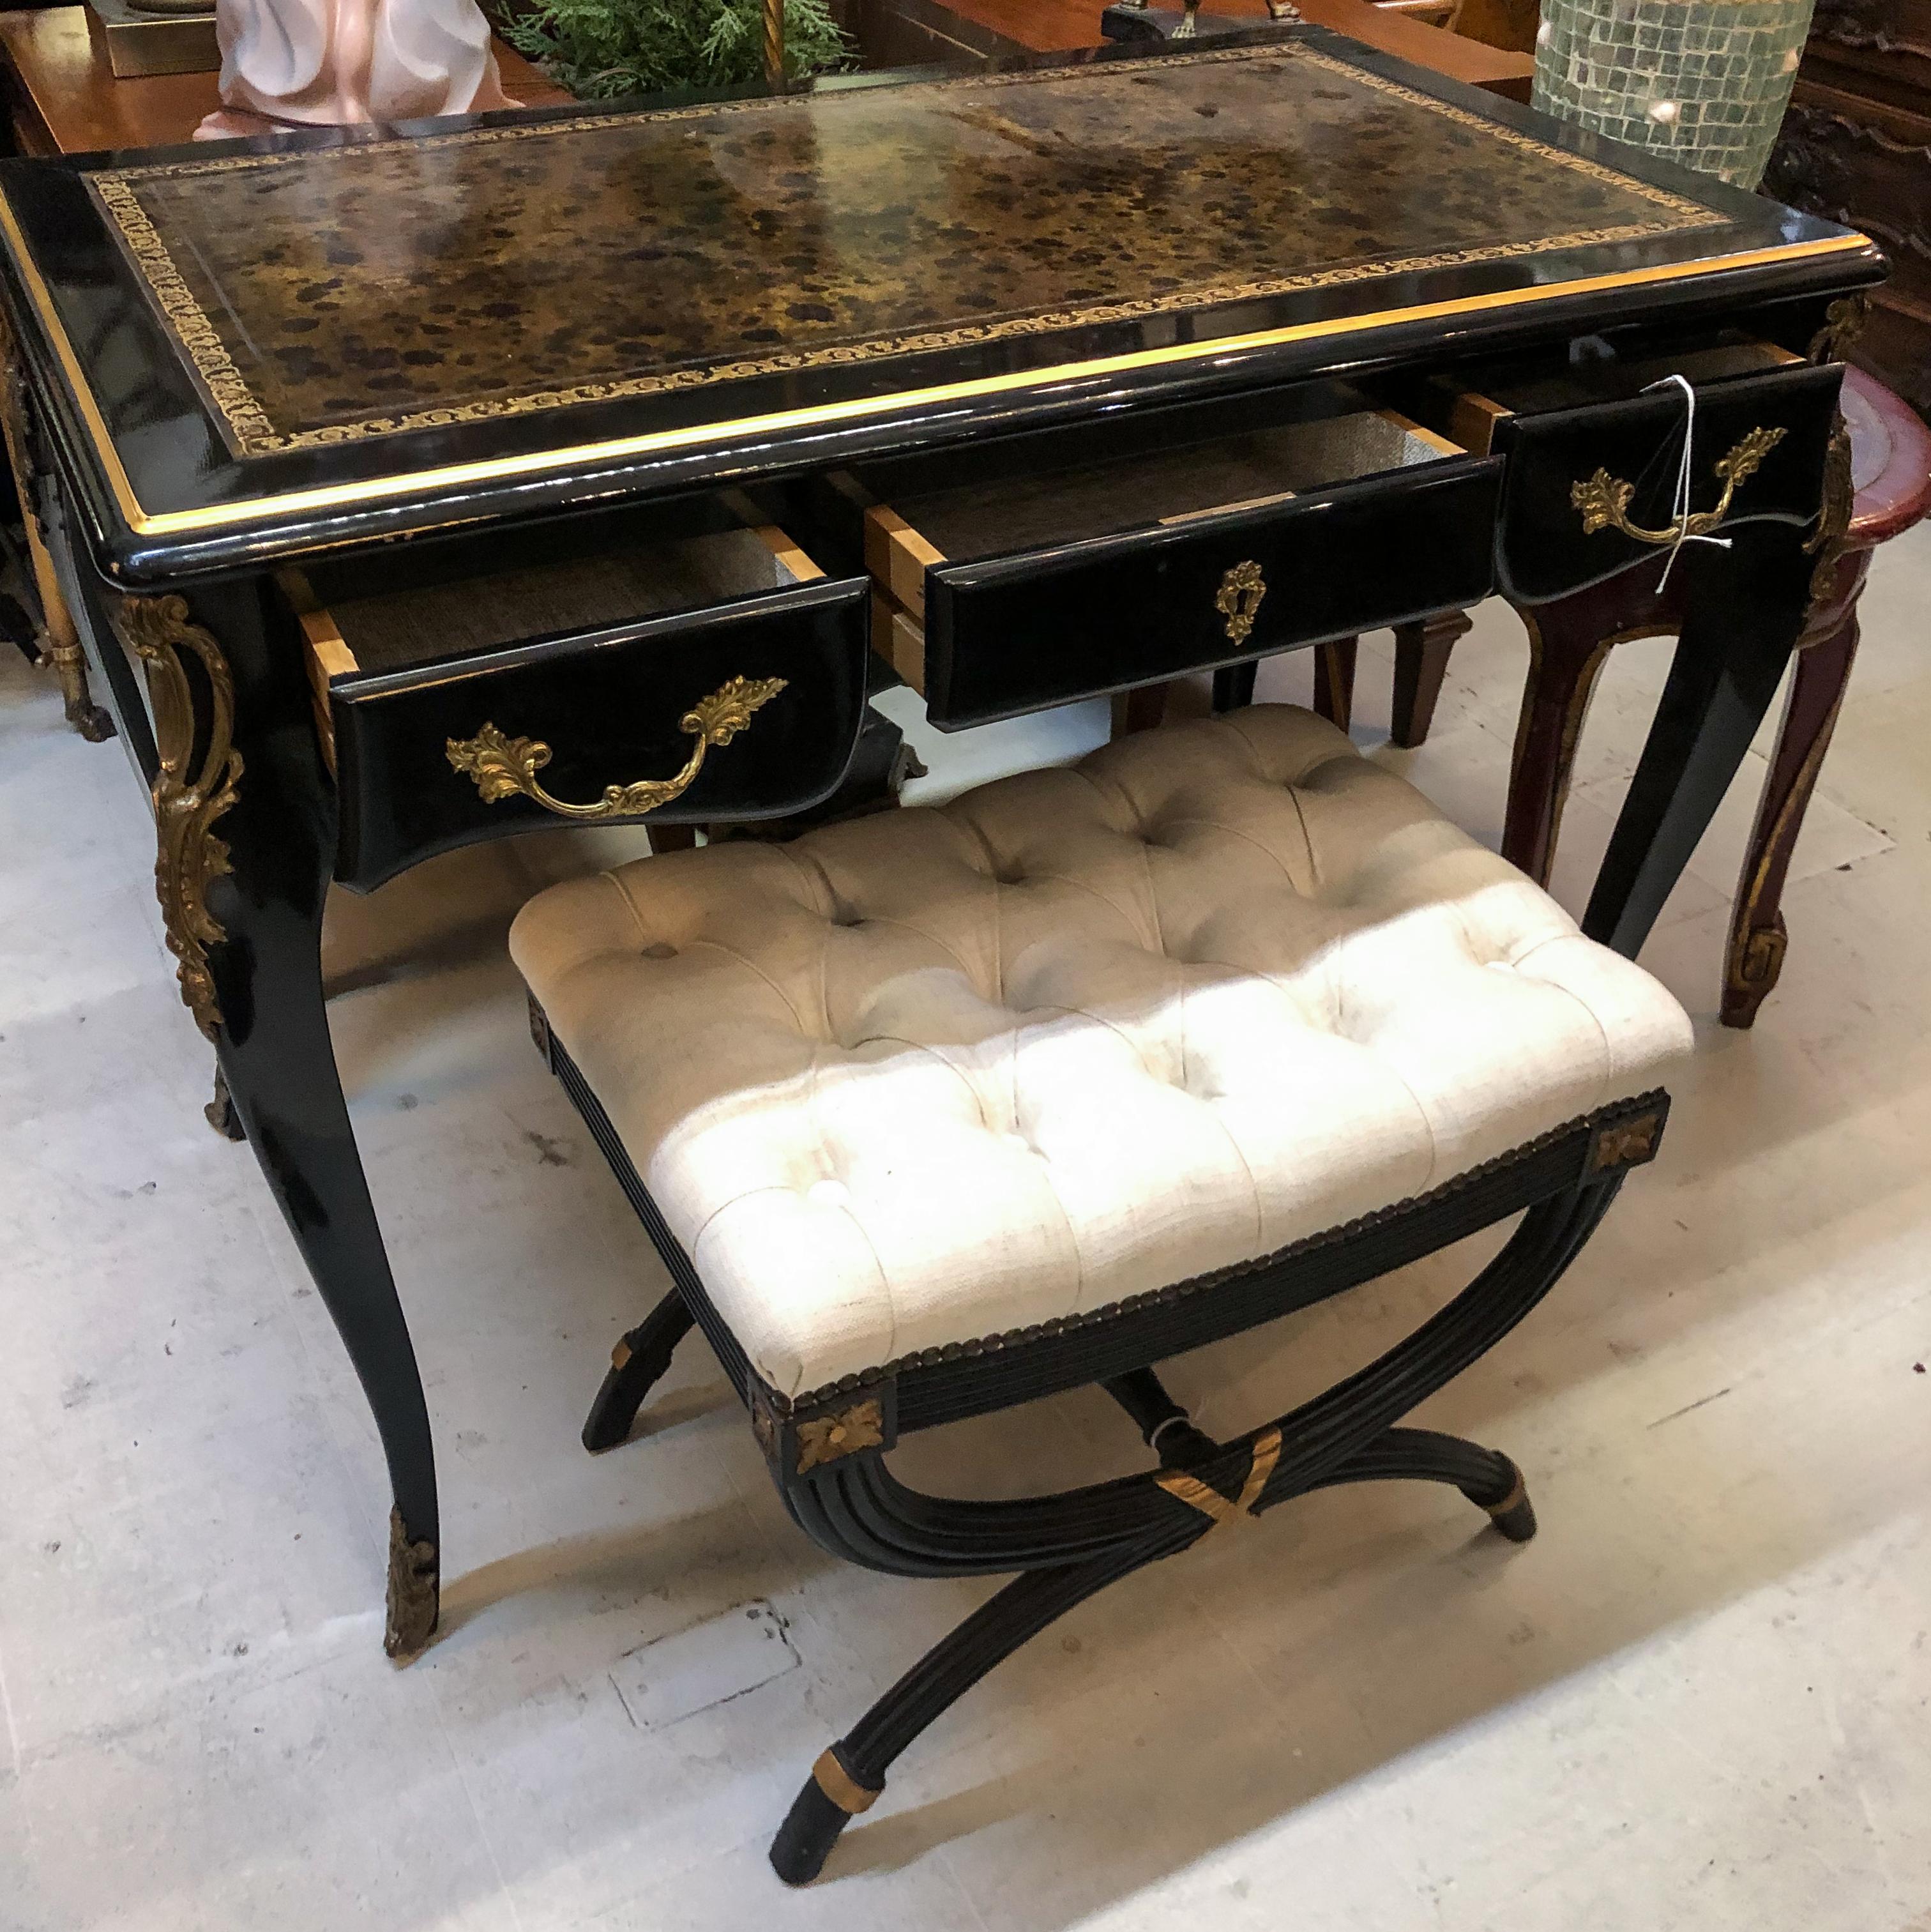 Black lacquer Louis XV style desk / secretary with brass details and leather top

Neoclassical stool in black lacquer with gilt details and beige linen tufted seat. Dimensions: 22